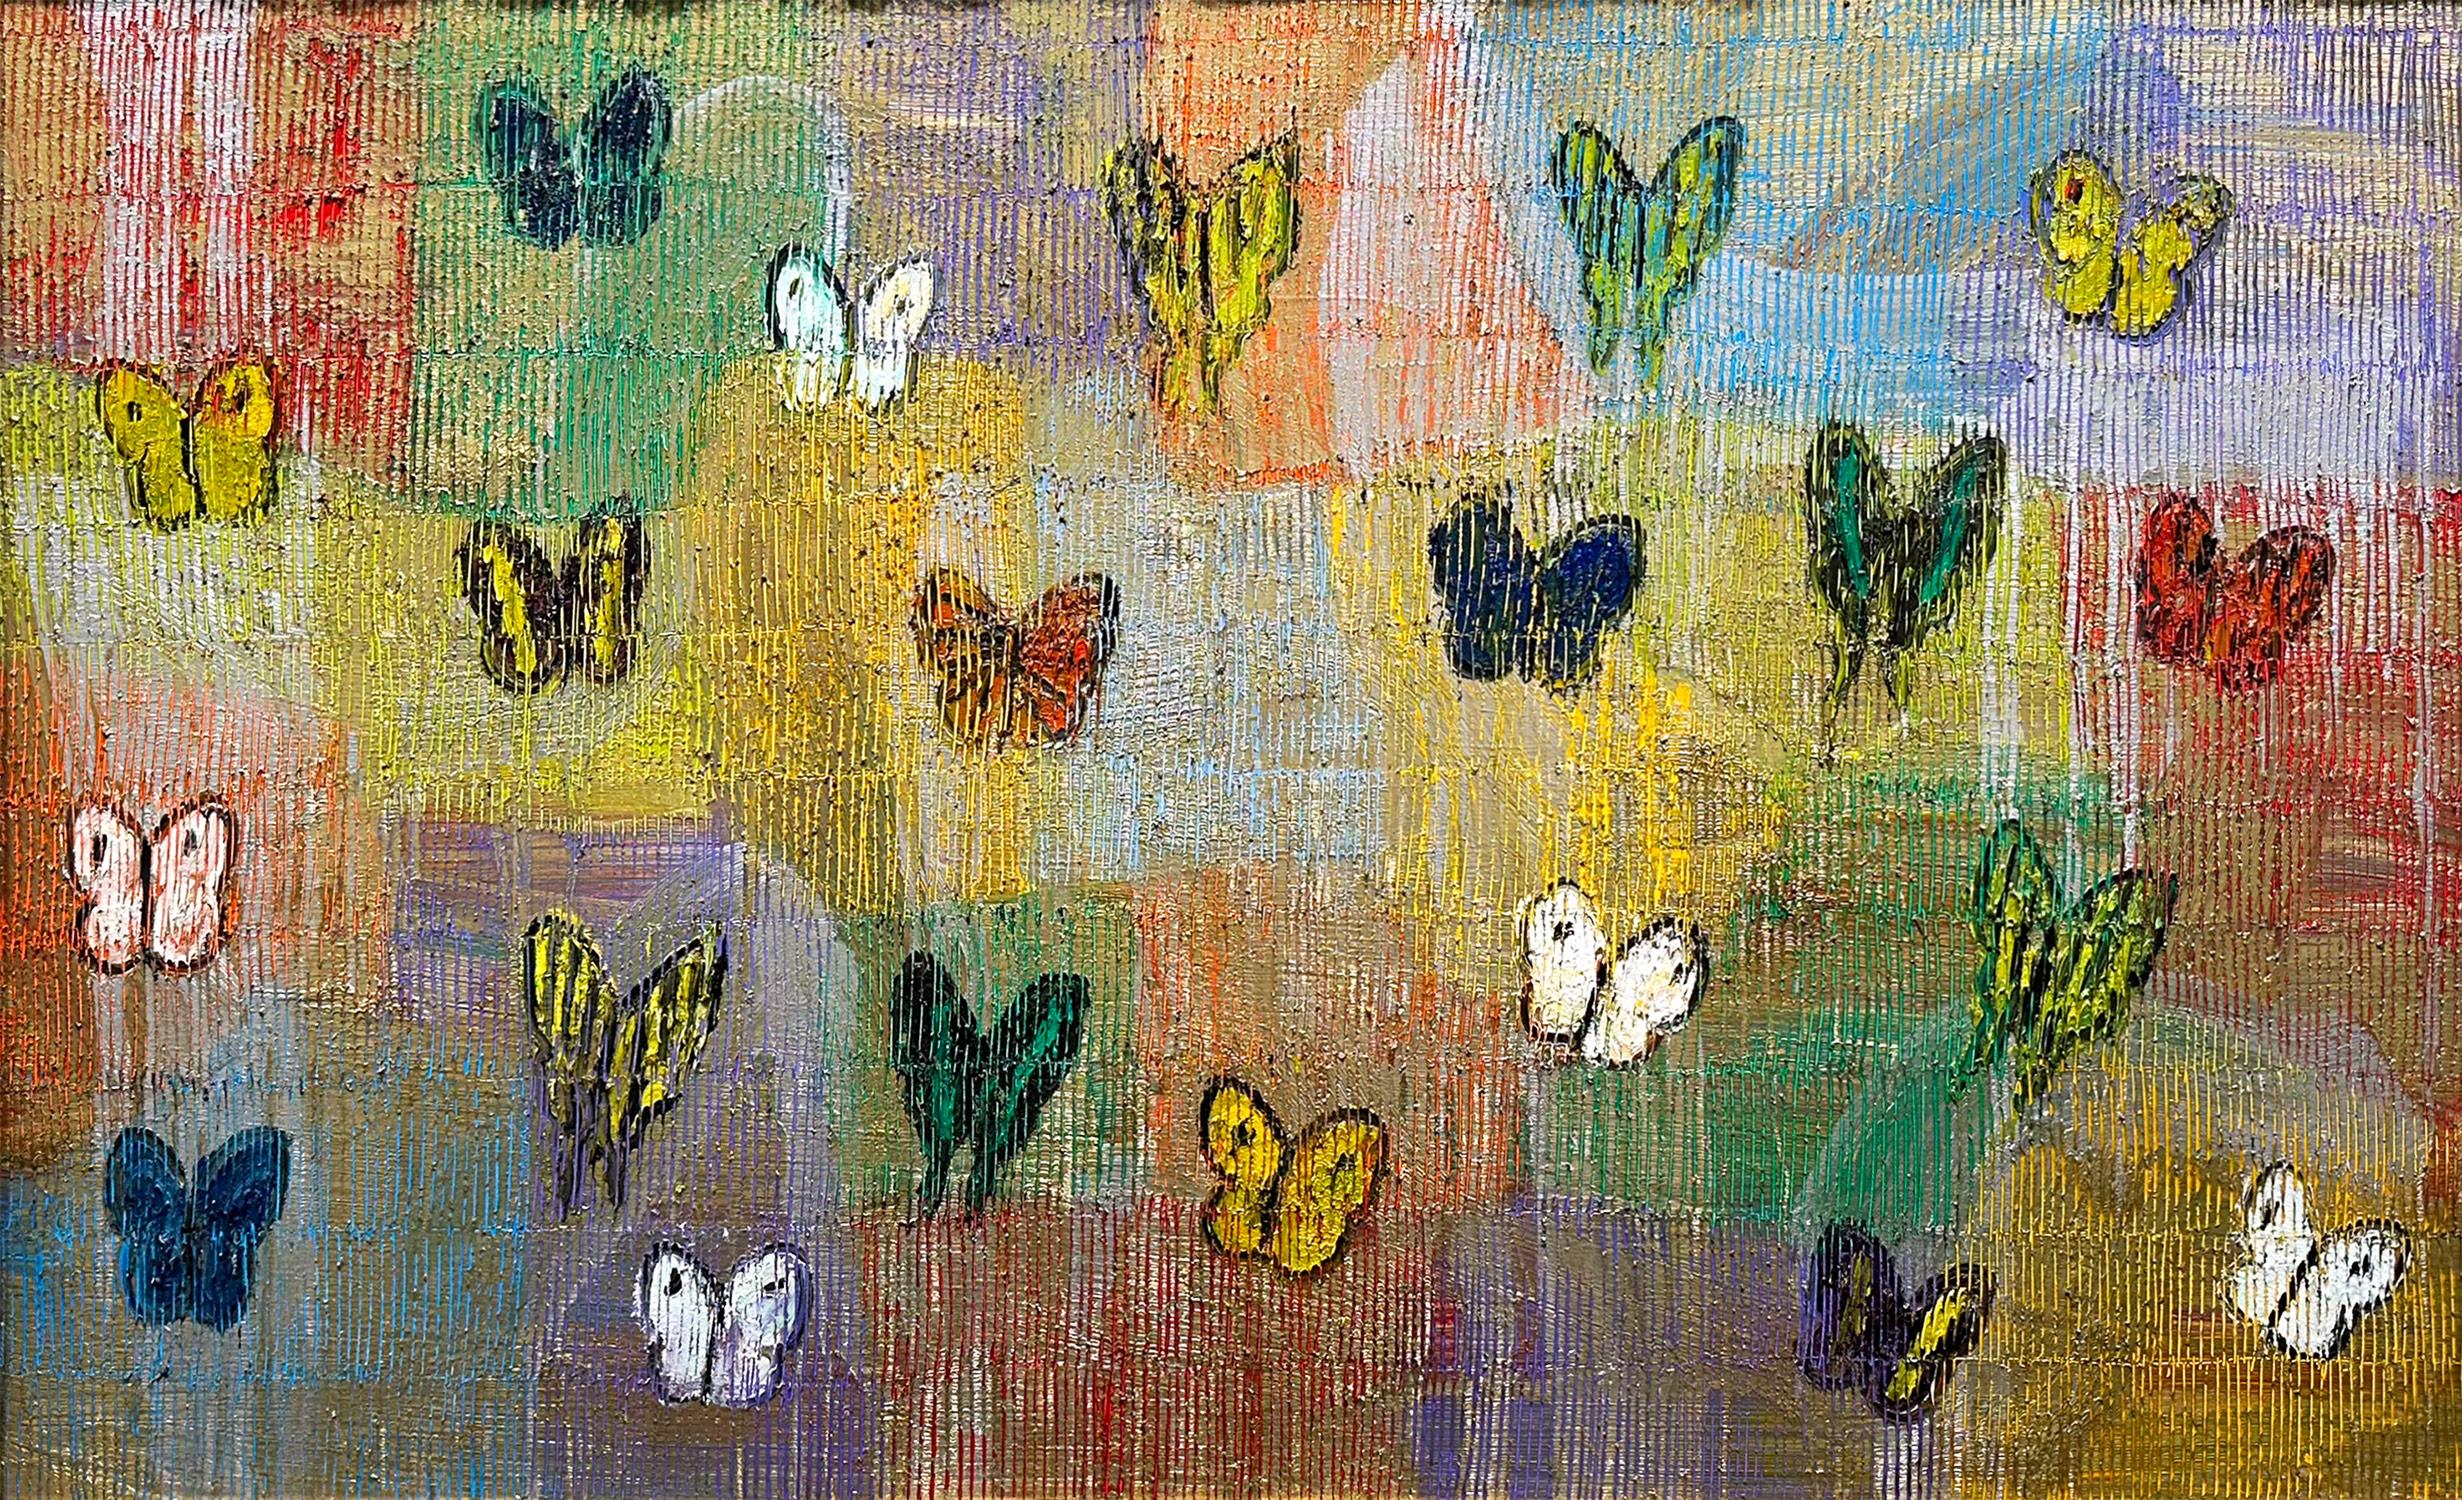 A wonderful composition of one of Slonem's most iconic subjects, Butterflies. This piece depicts delicate multicolor butterflies in ascension placed in a wonderful golden silver landscape. Slonem traces his famous crosshatch details throughout the